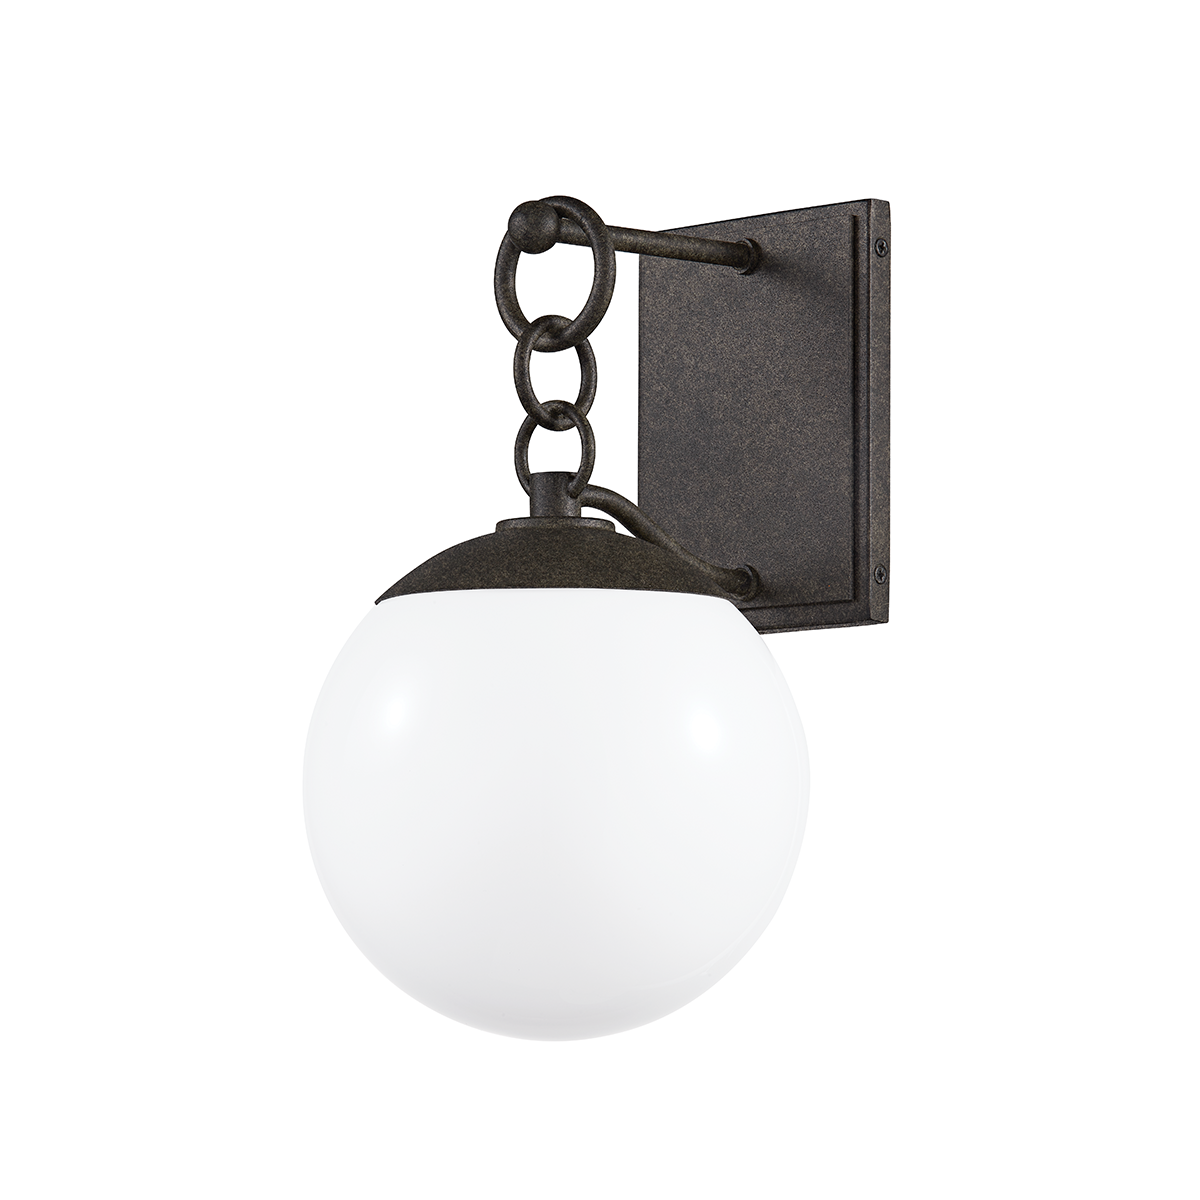 Troy STORMY 1 LIGHT SMALL EXTERIOR WALL SCONCE B1508 Outdoor l Wall Troy Lighting   